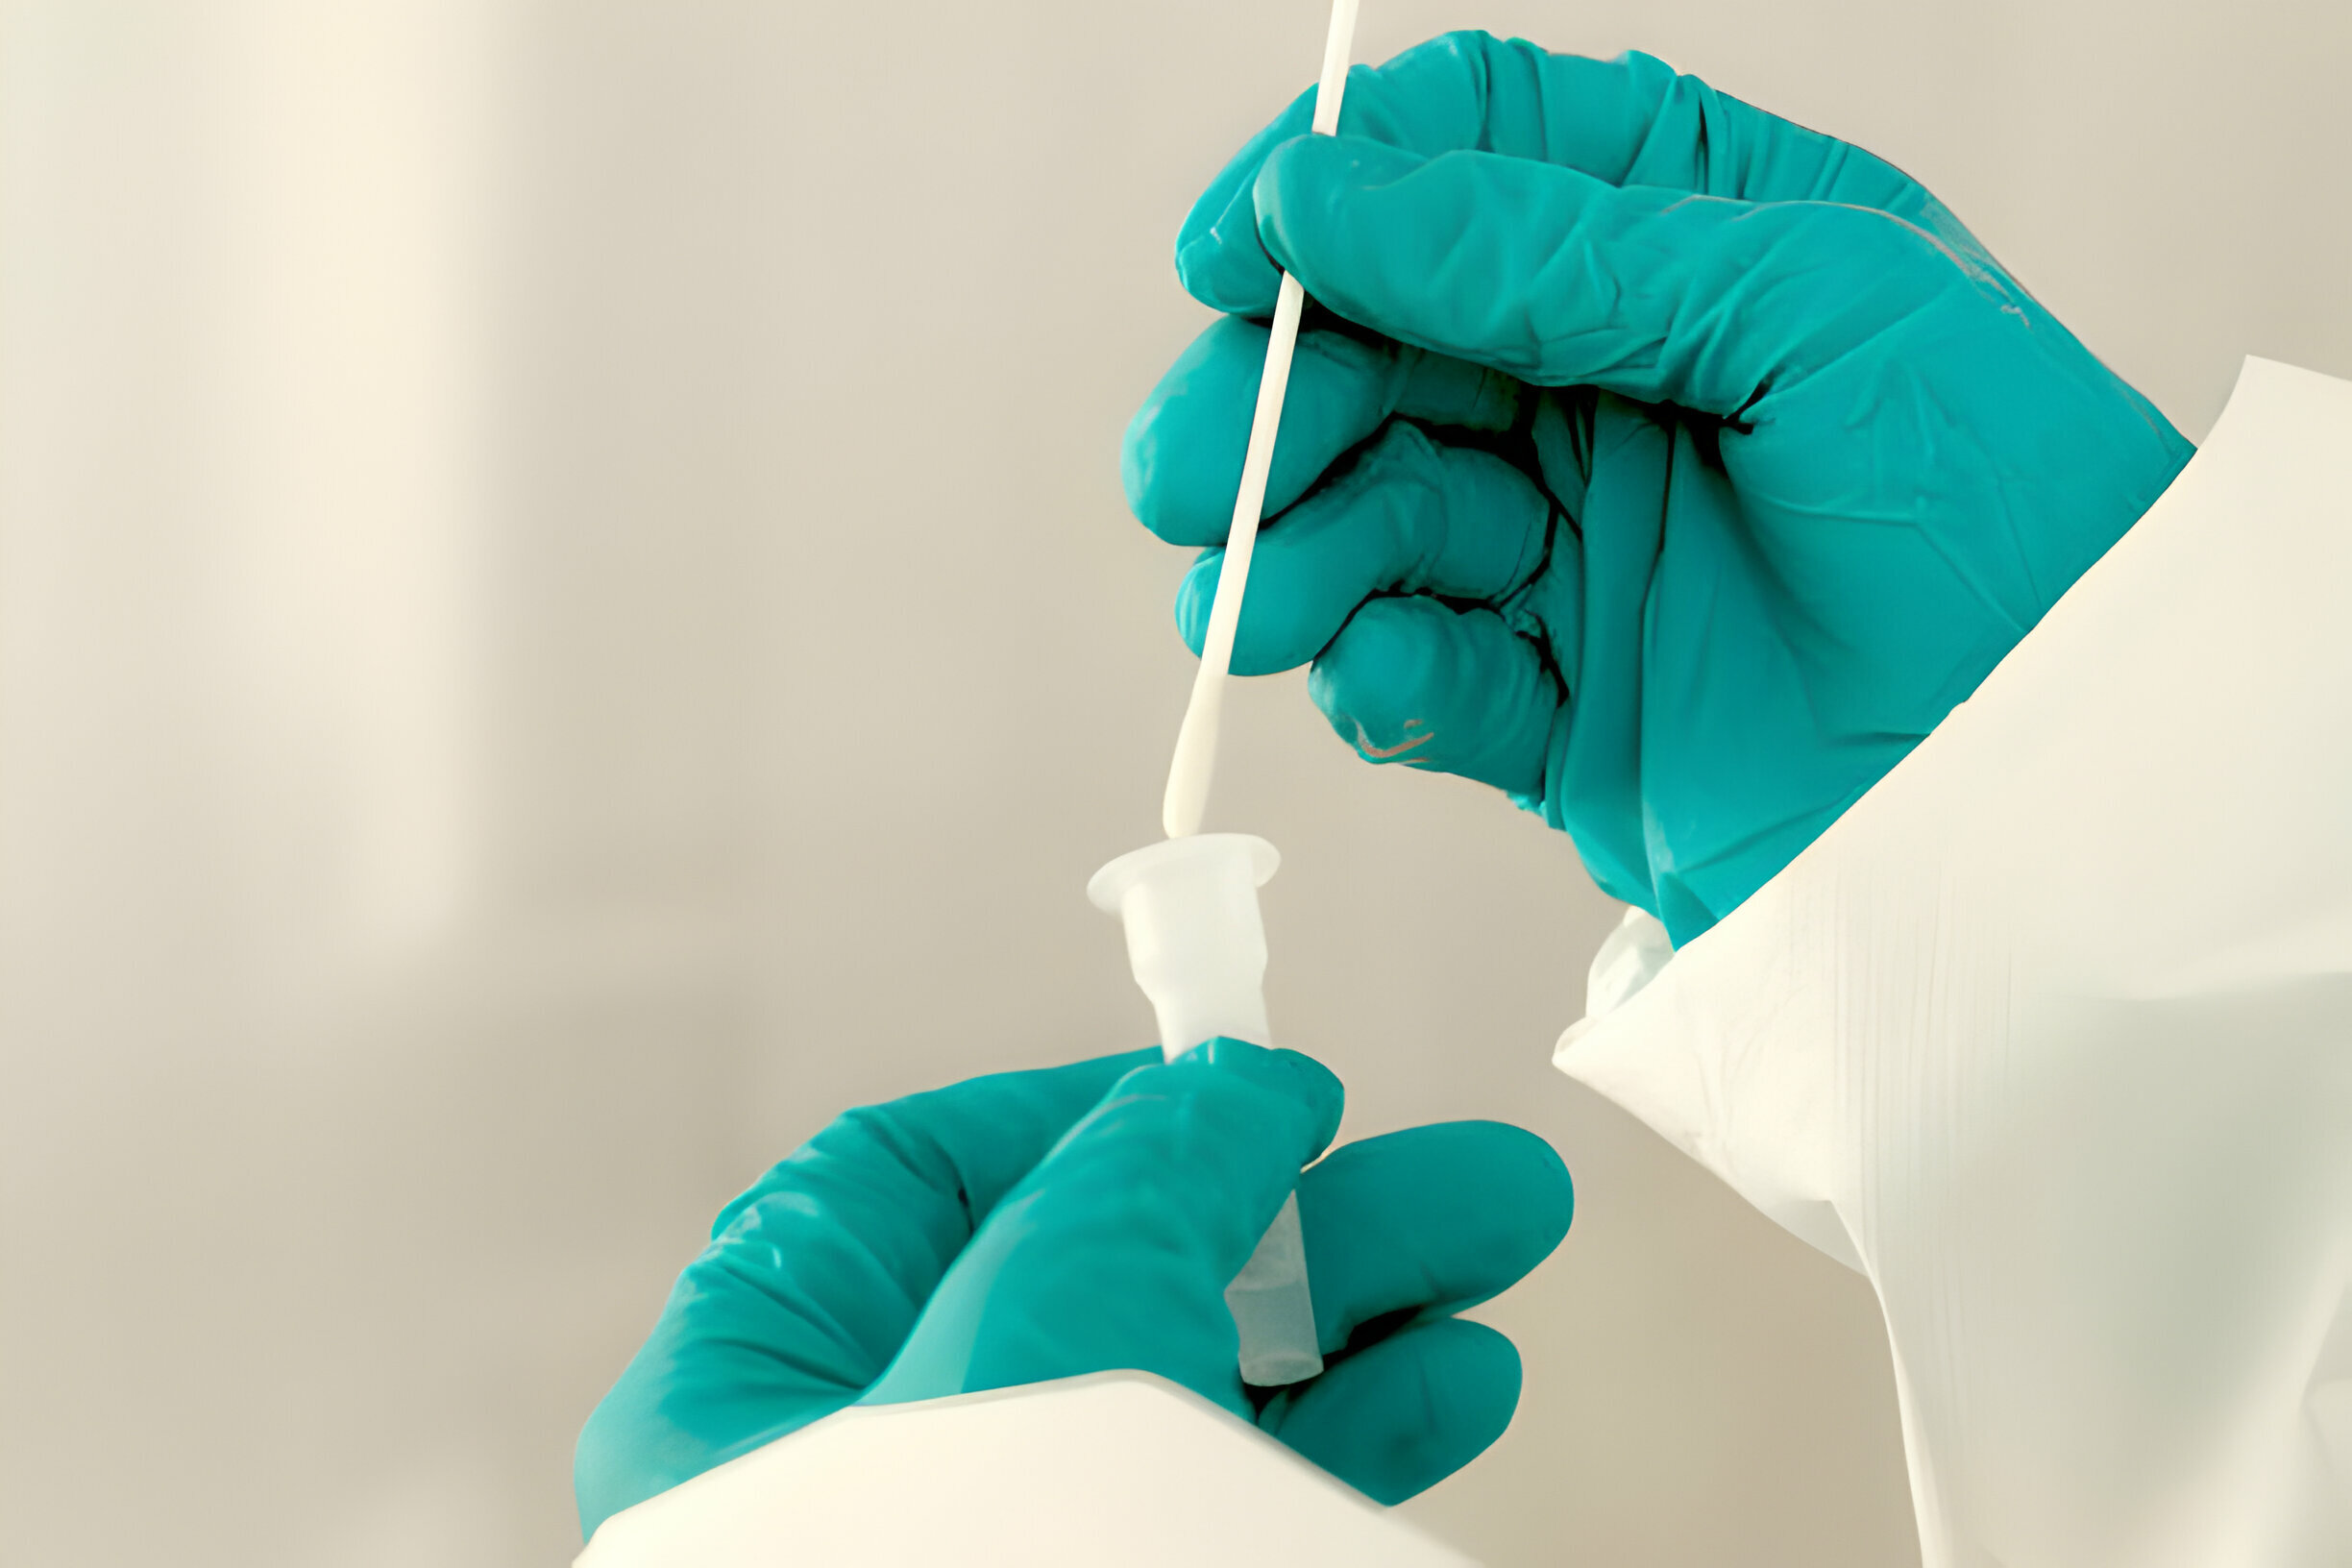 Flocked vs Cotton : Which Swab is Better for Antibody Testing